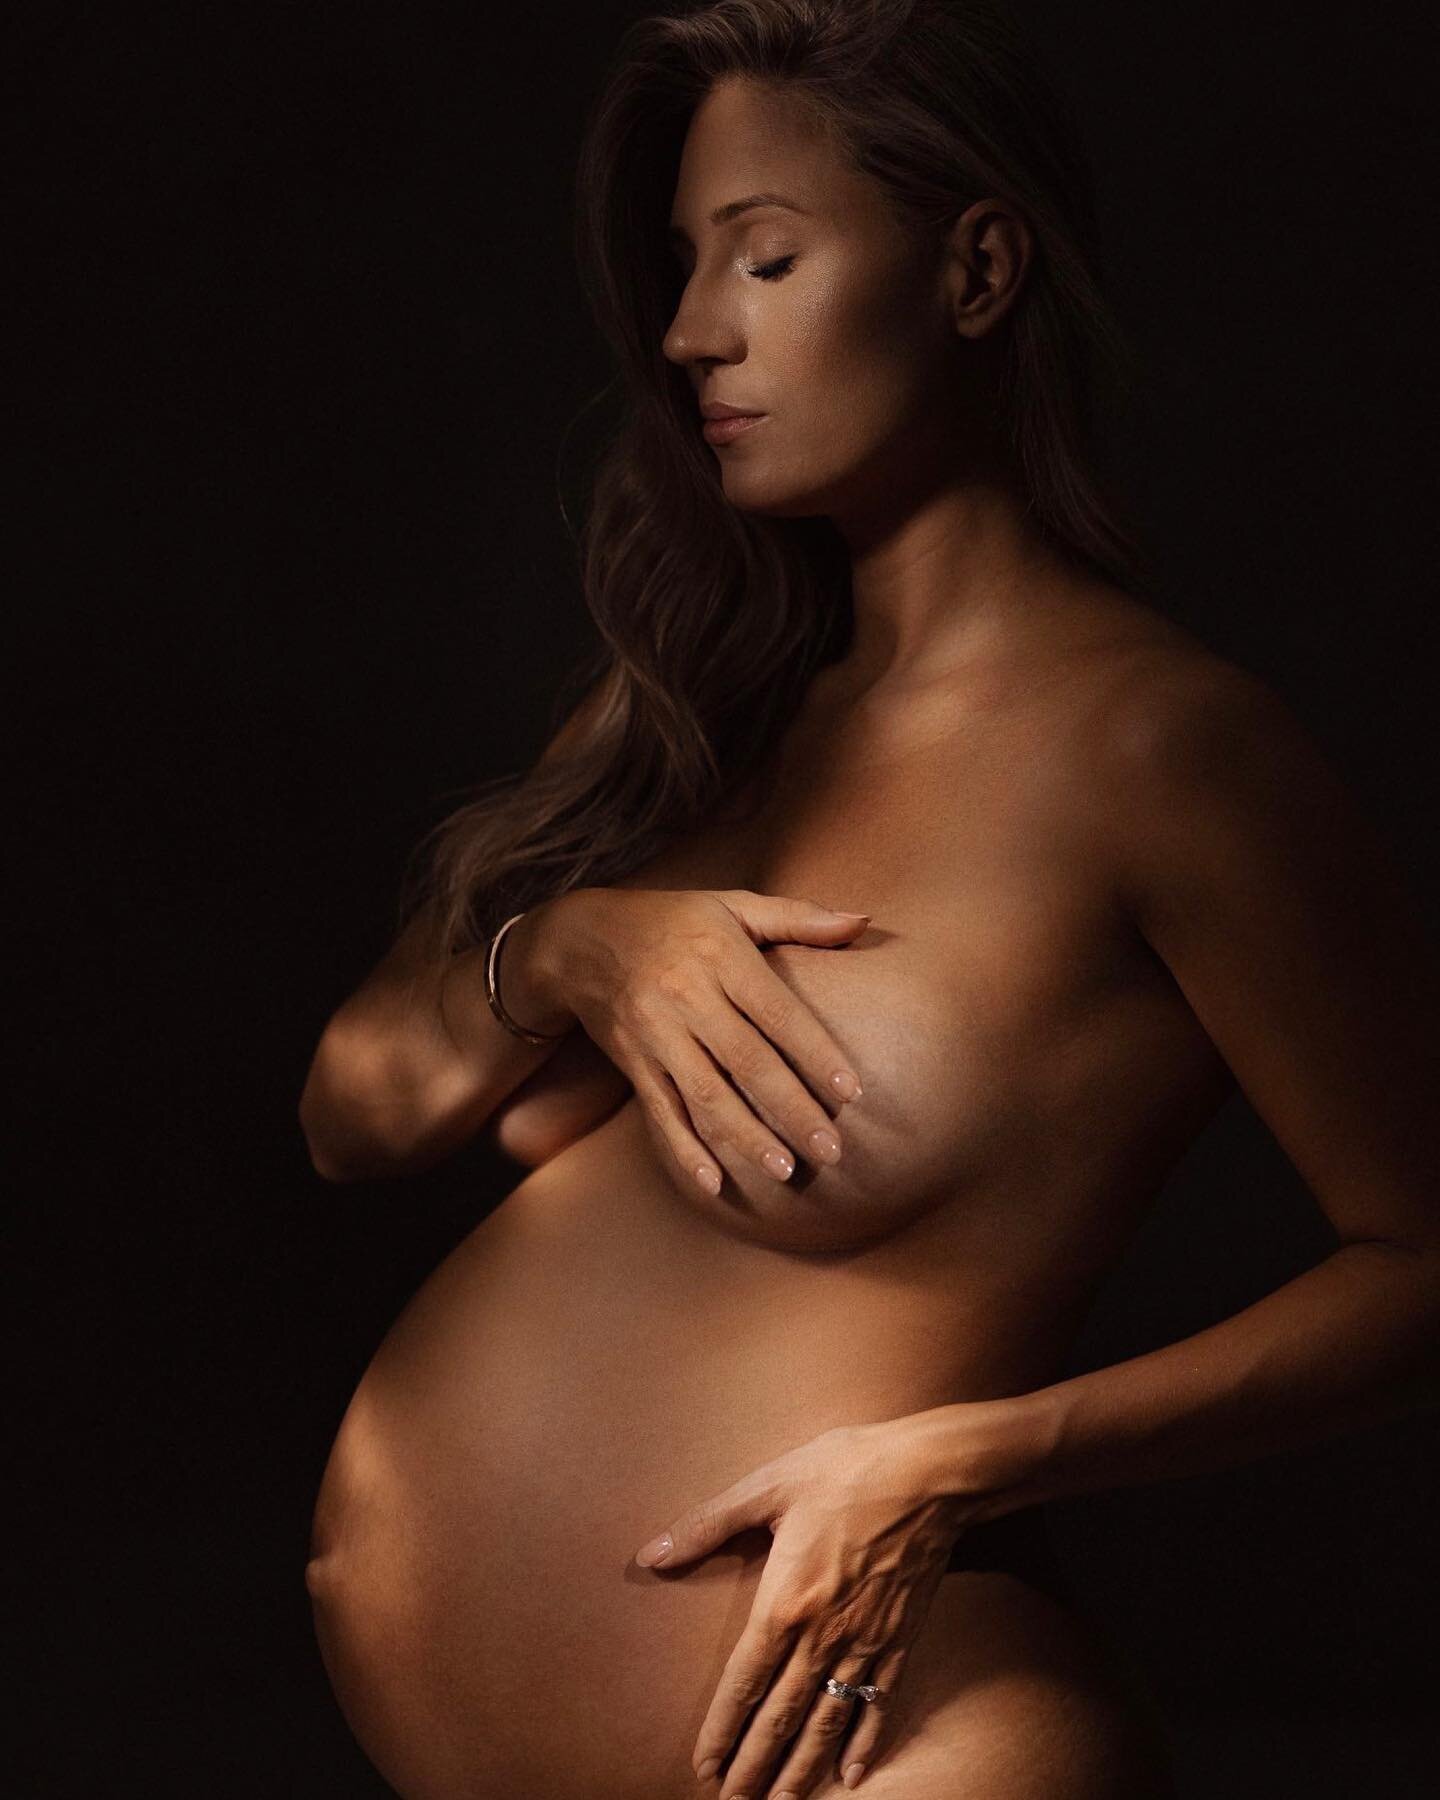 A MOTHER

#maternityphotographers#sydneymaternityphotographer#sydneymums#sydneymumsandbubs#mothermuse#sydneymaternity#pregnancyshoot#pregnancyexperience#pregnancydiary#30weekspregnant#33weekspregnant#pregnantandperfect#pregnantandbeautiful